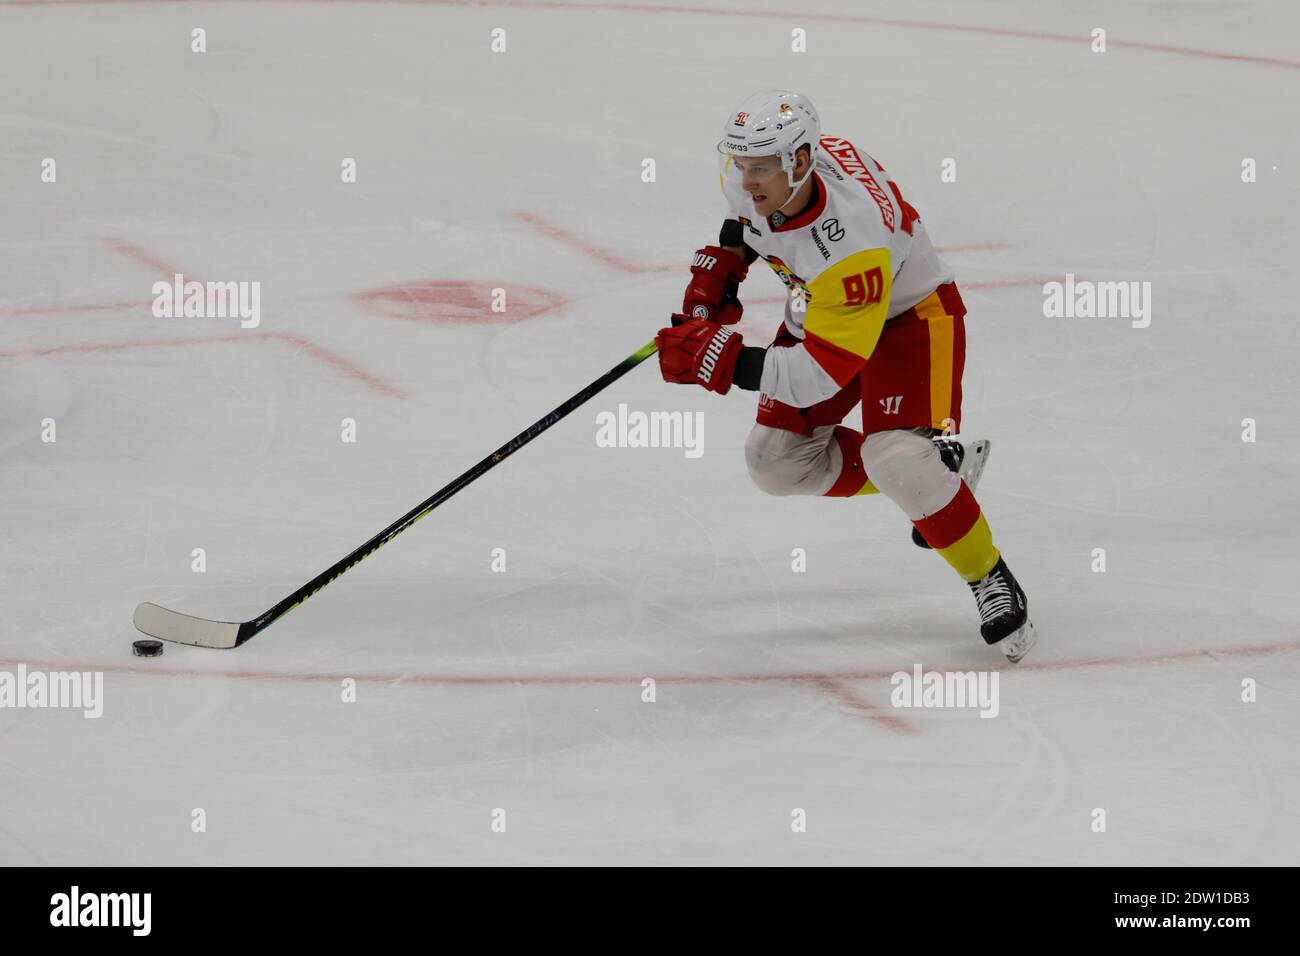 Khl ice hockey hi-res stock photography and images